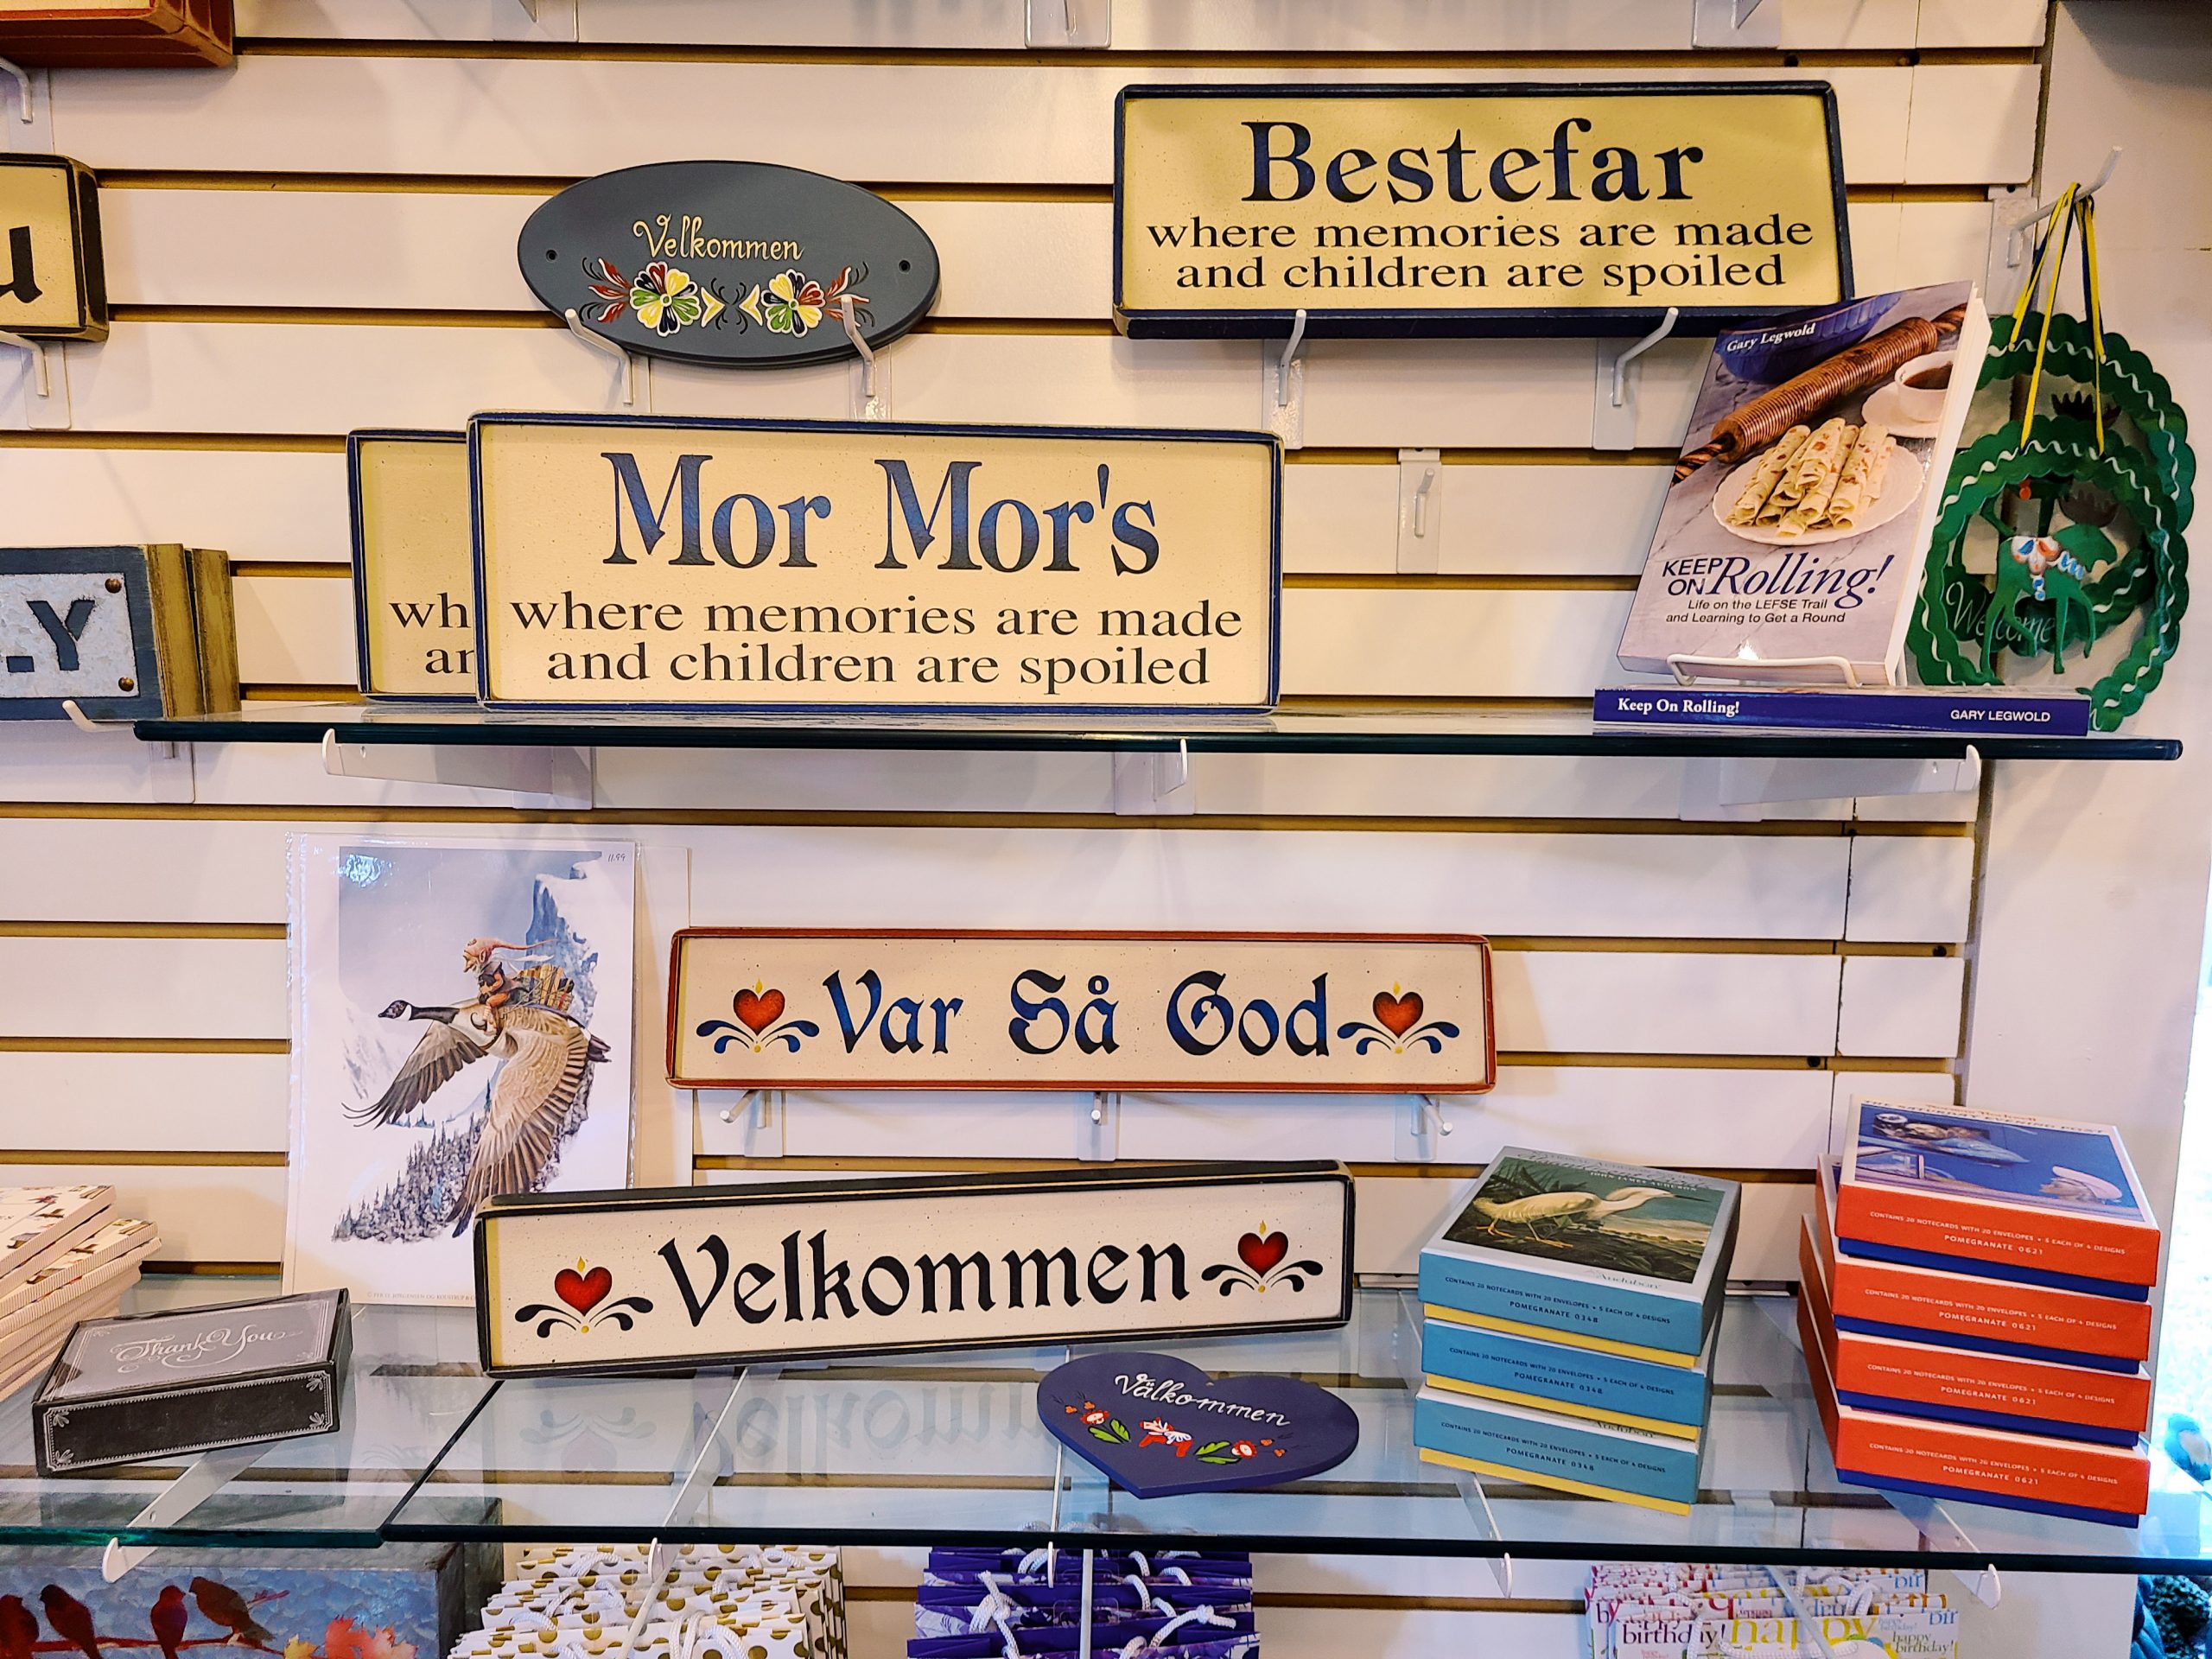 Doorsigns and decorations available at Bestemors